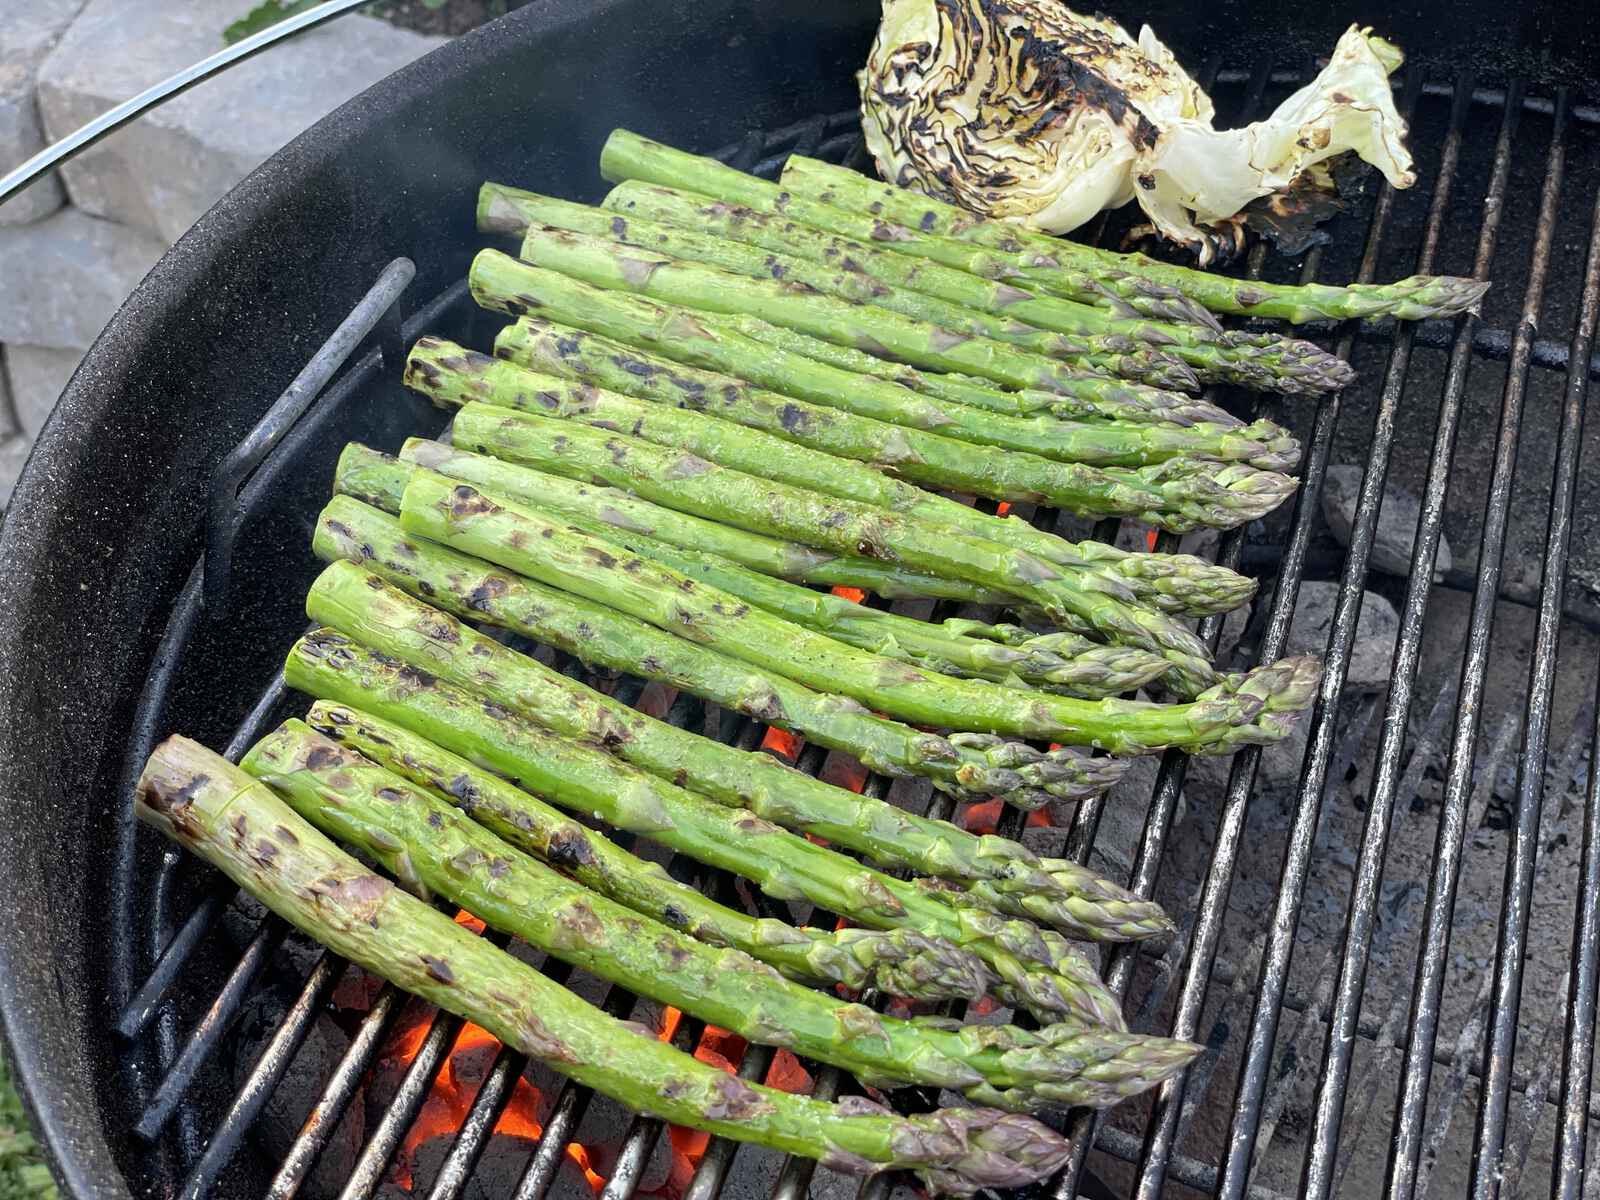 Cabbage and asparagus on a grill